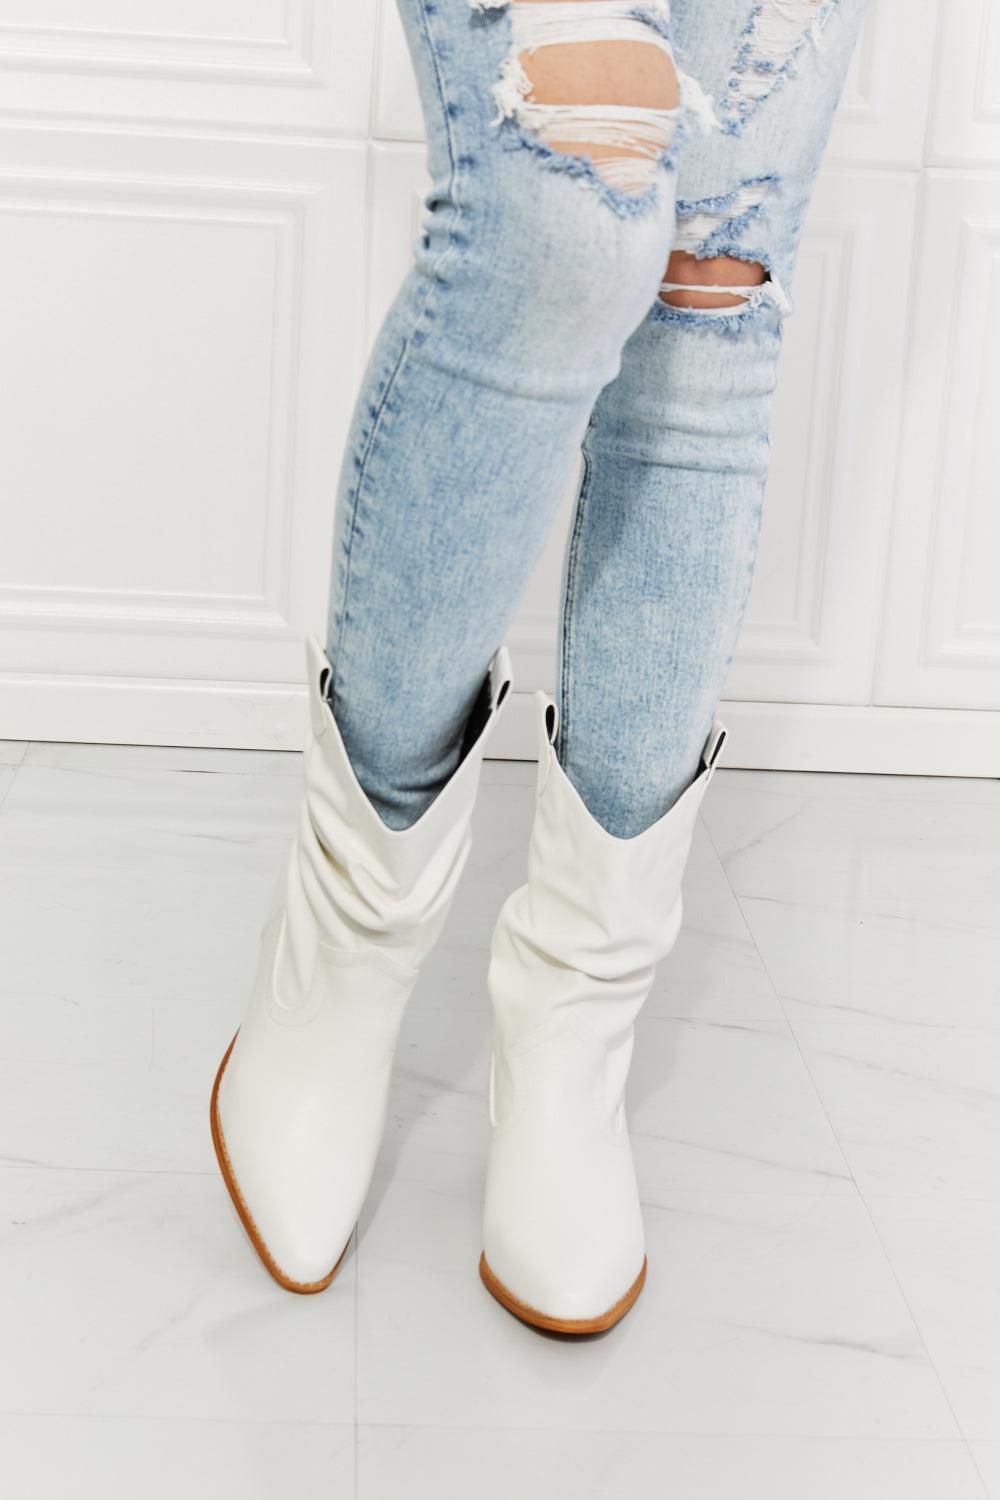 MMShoes Better in Texas Scrunch Cowboy Boots in White - The Fiery Jasmine